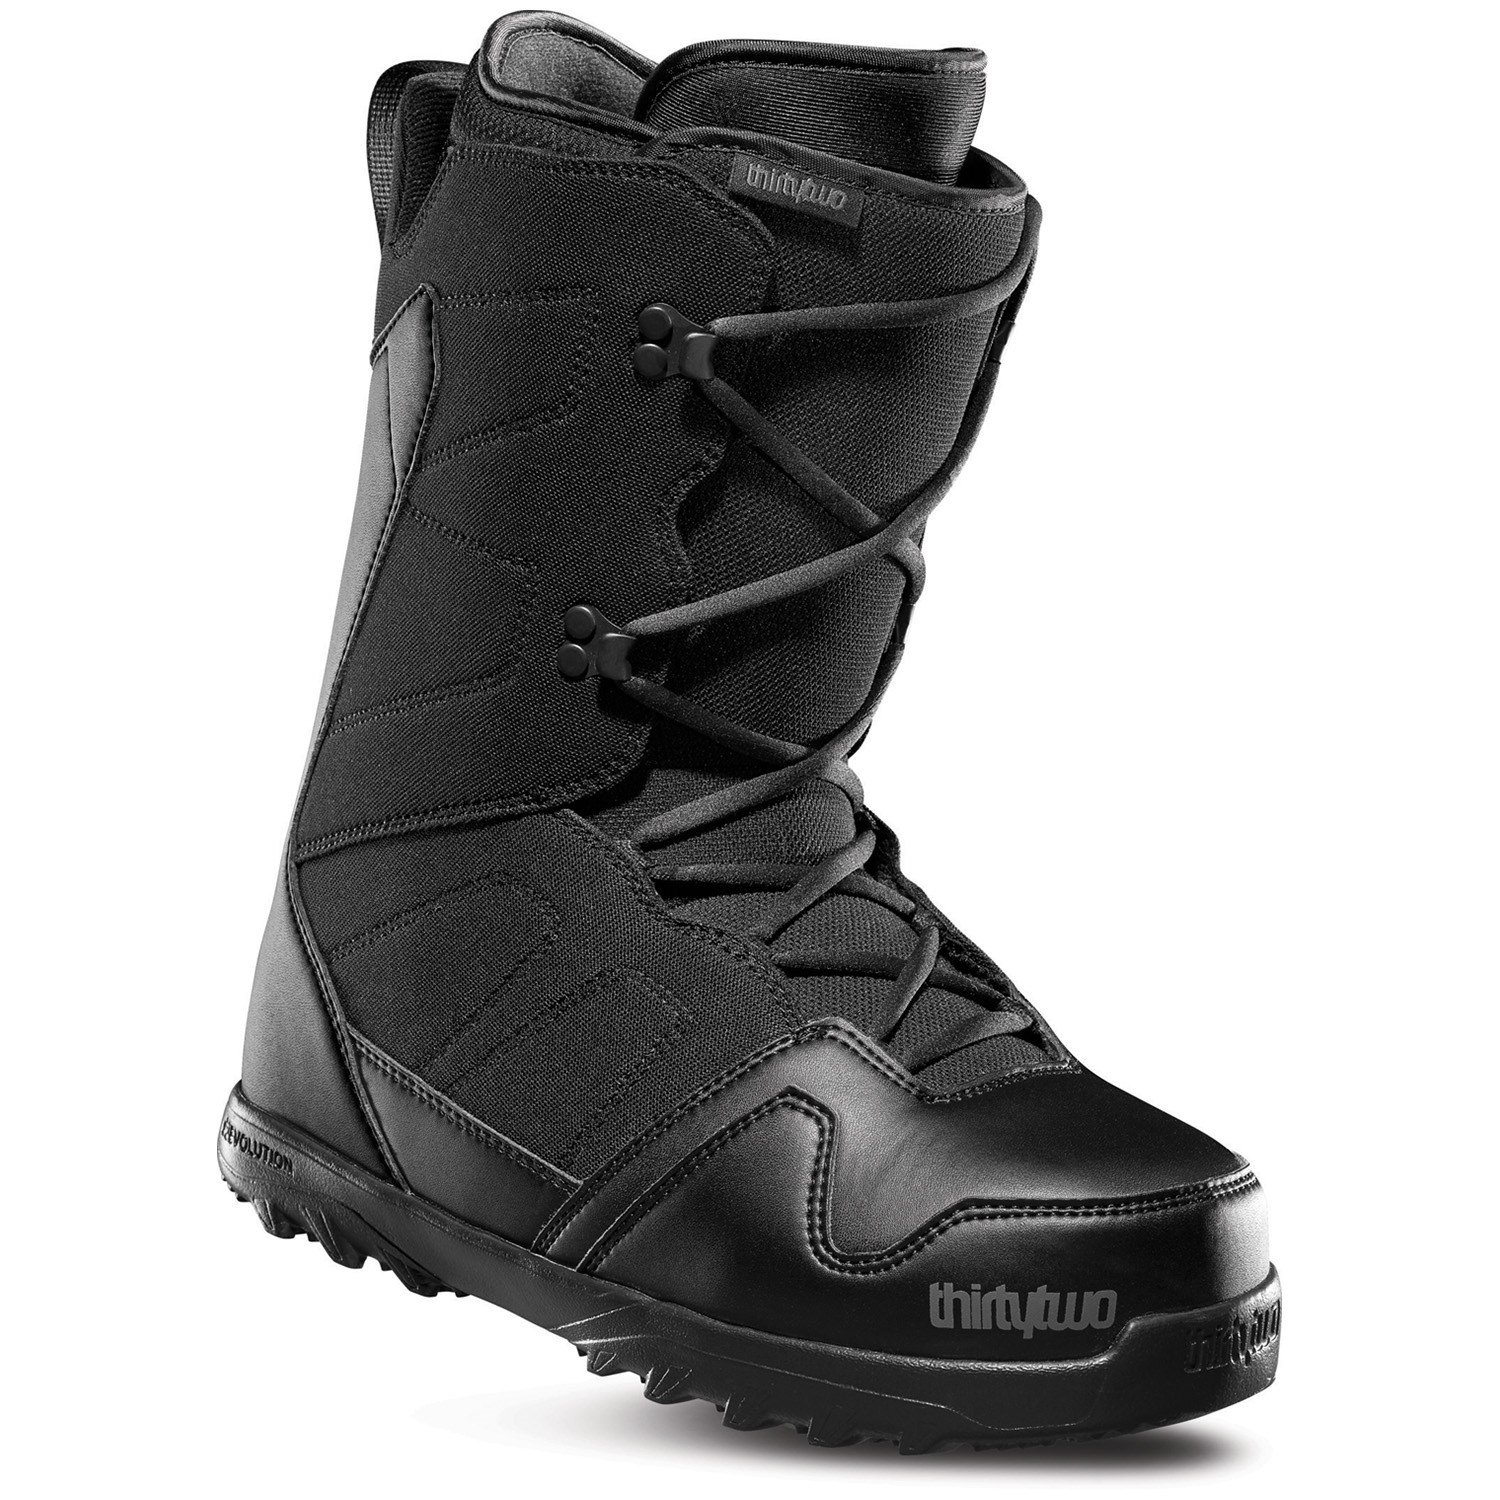 thirtytwo Exit Snowboard Boots 2019 | evo